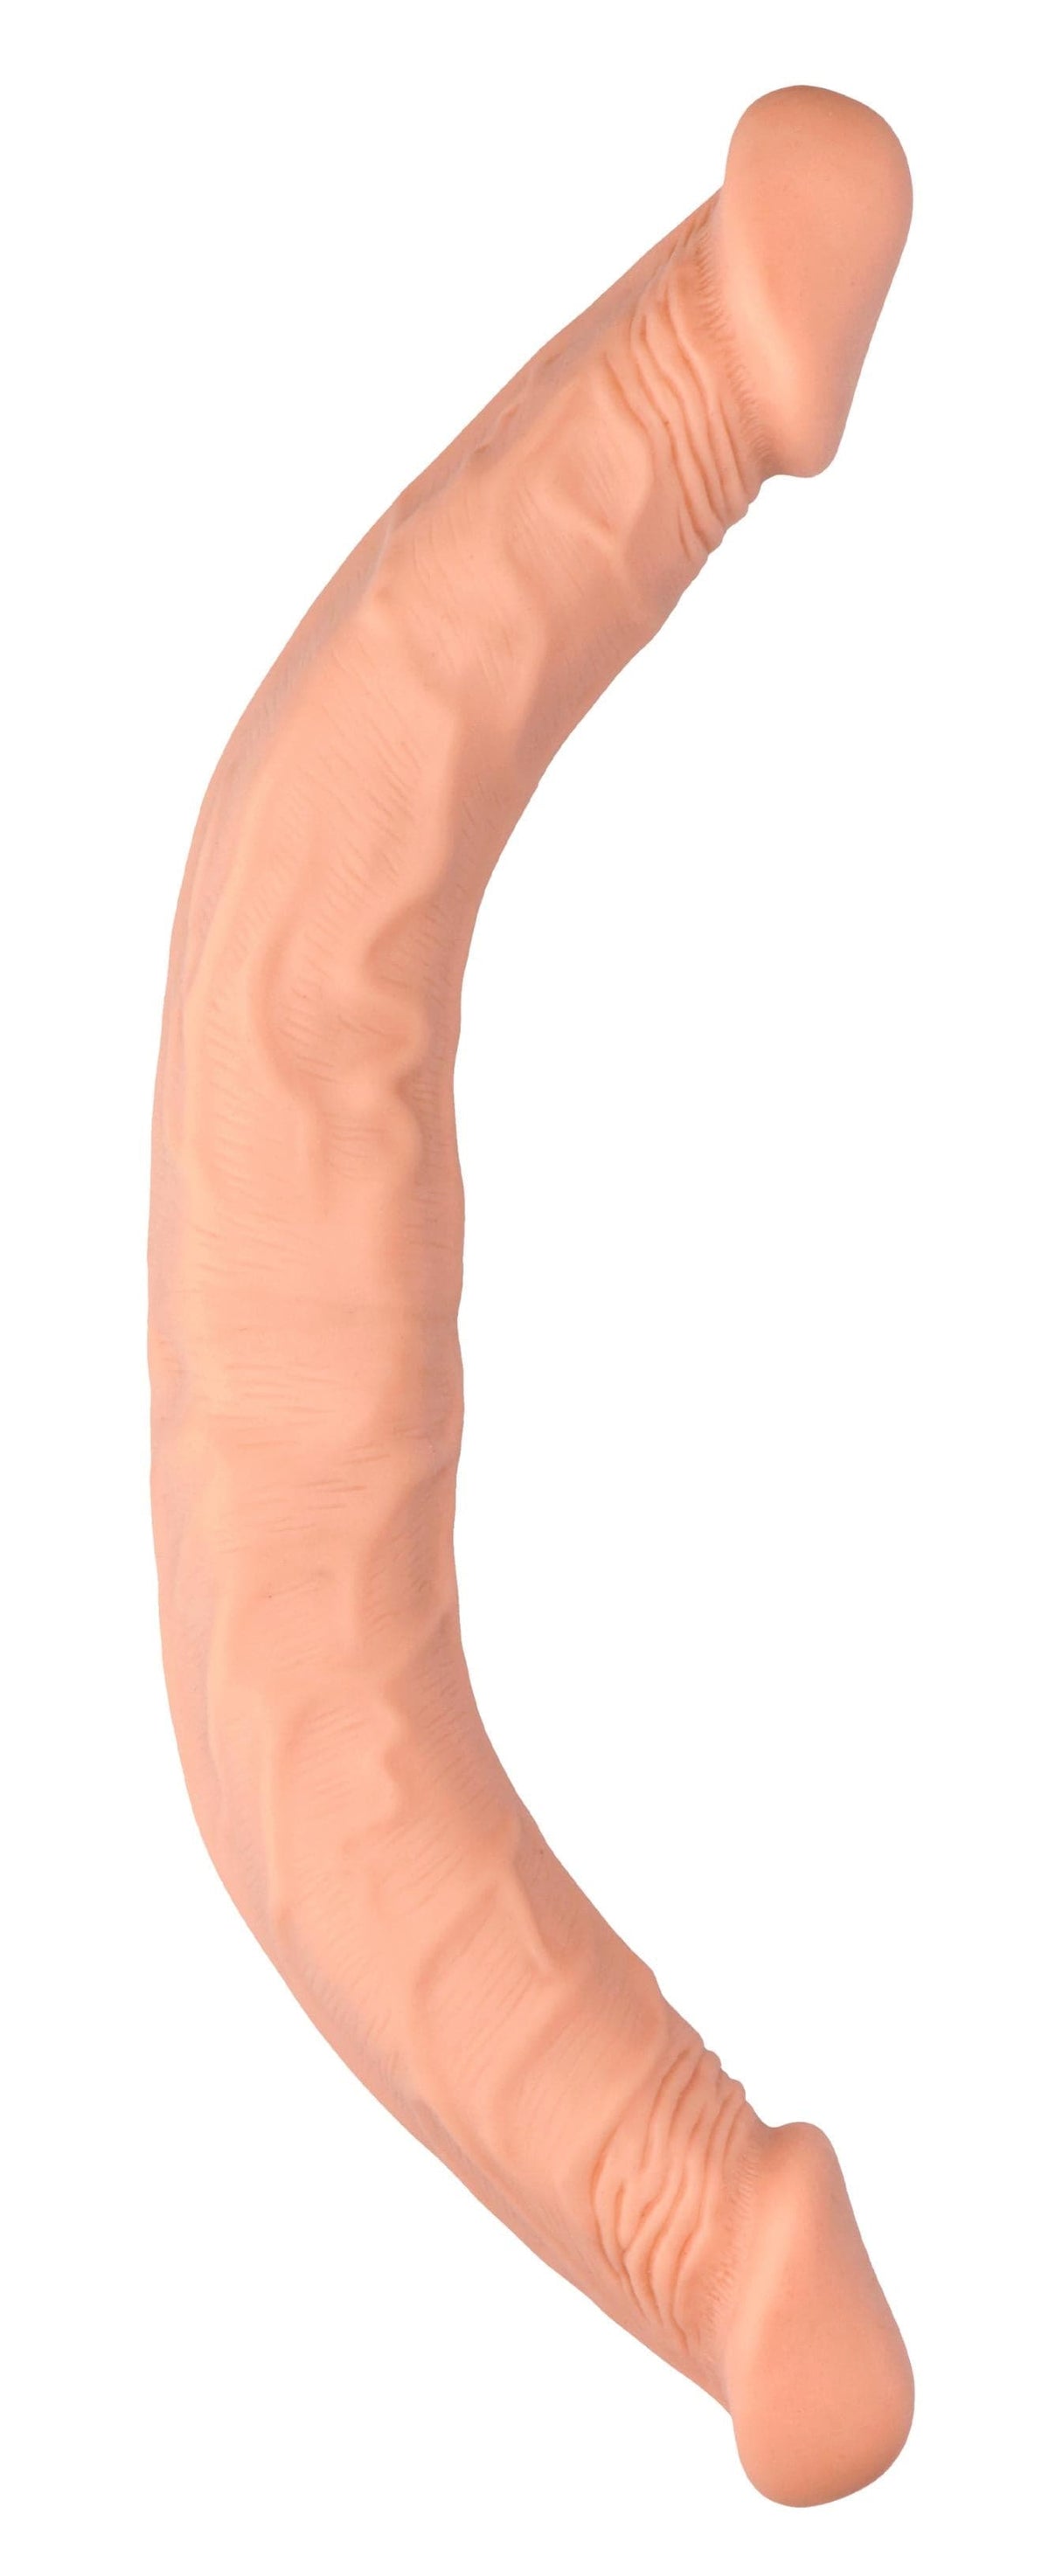 18 inch double dong flesh